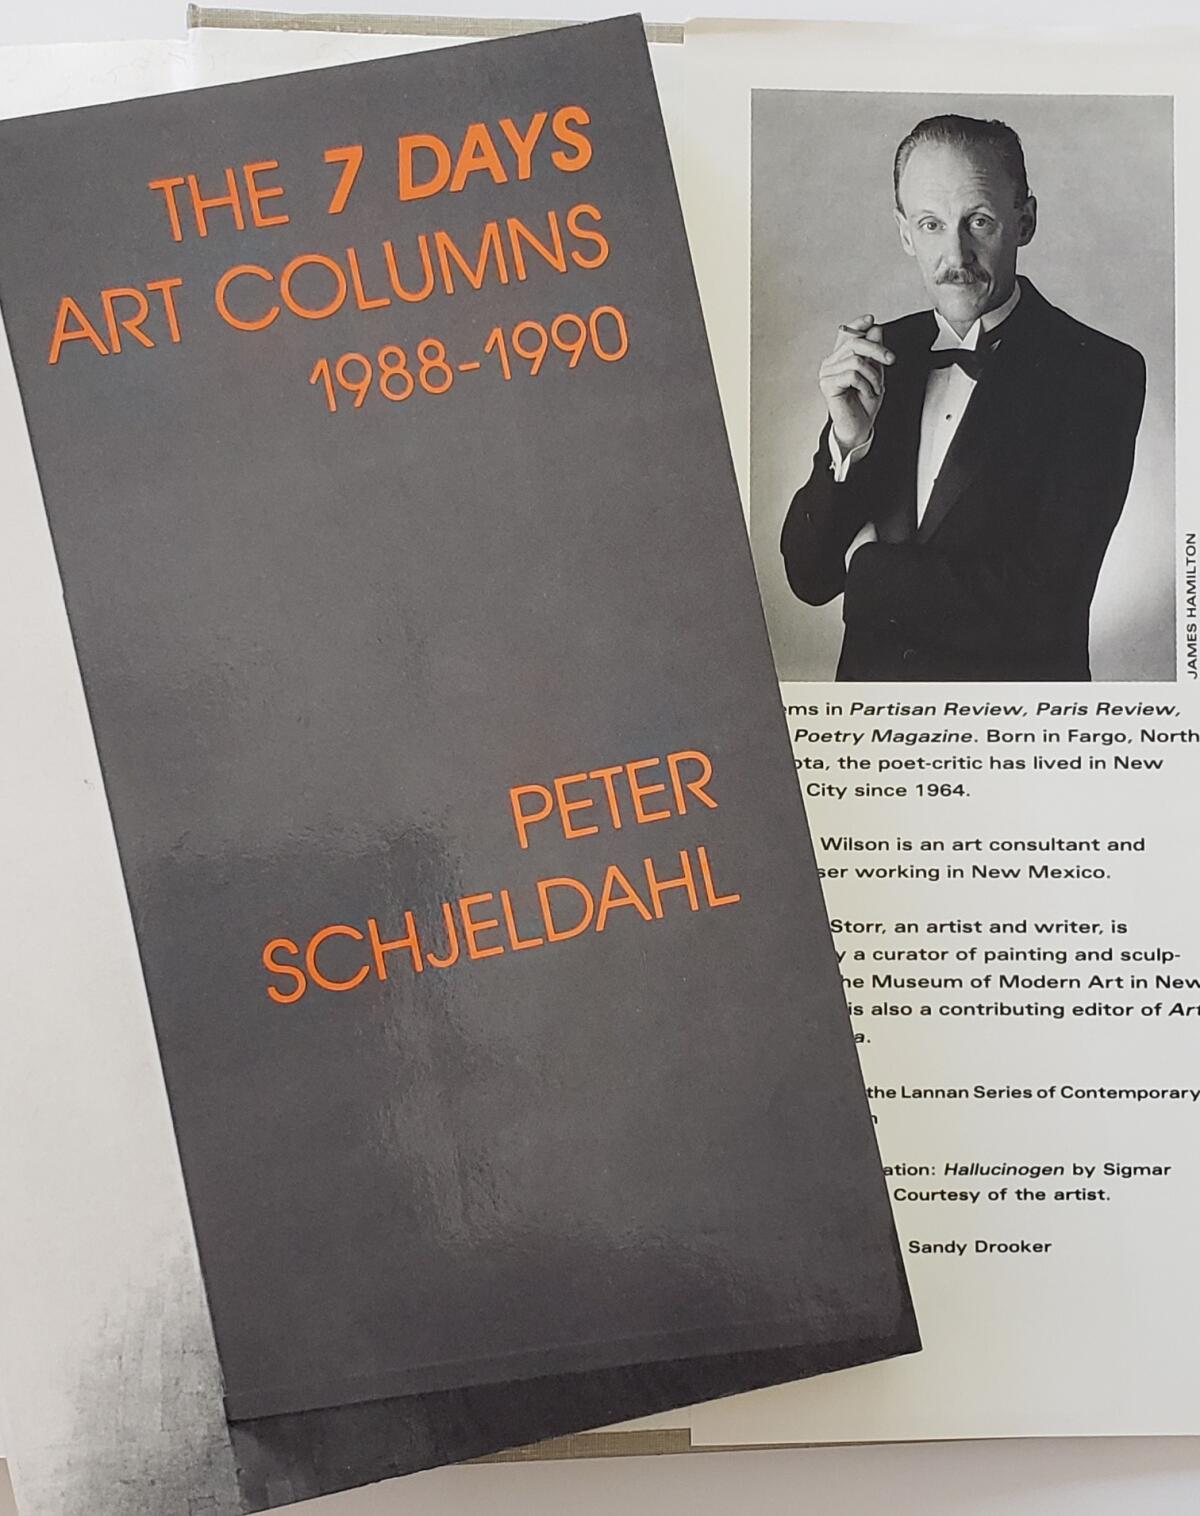 A gray rectangle on which is written "The 7 Days Art Columns 1988-1990" in front of a page with a photo of a man and text.